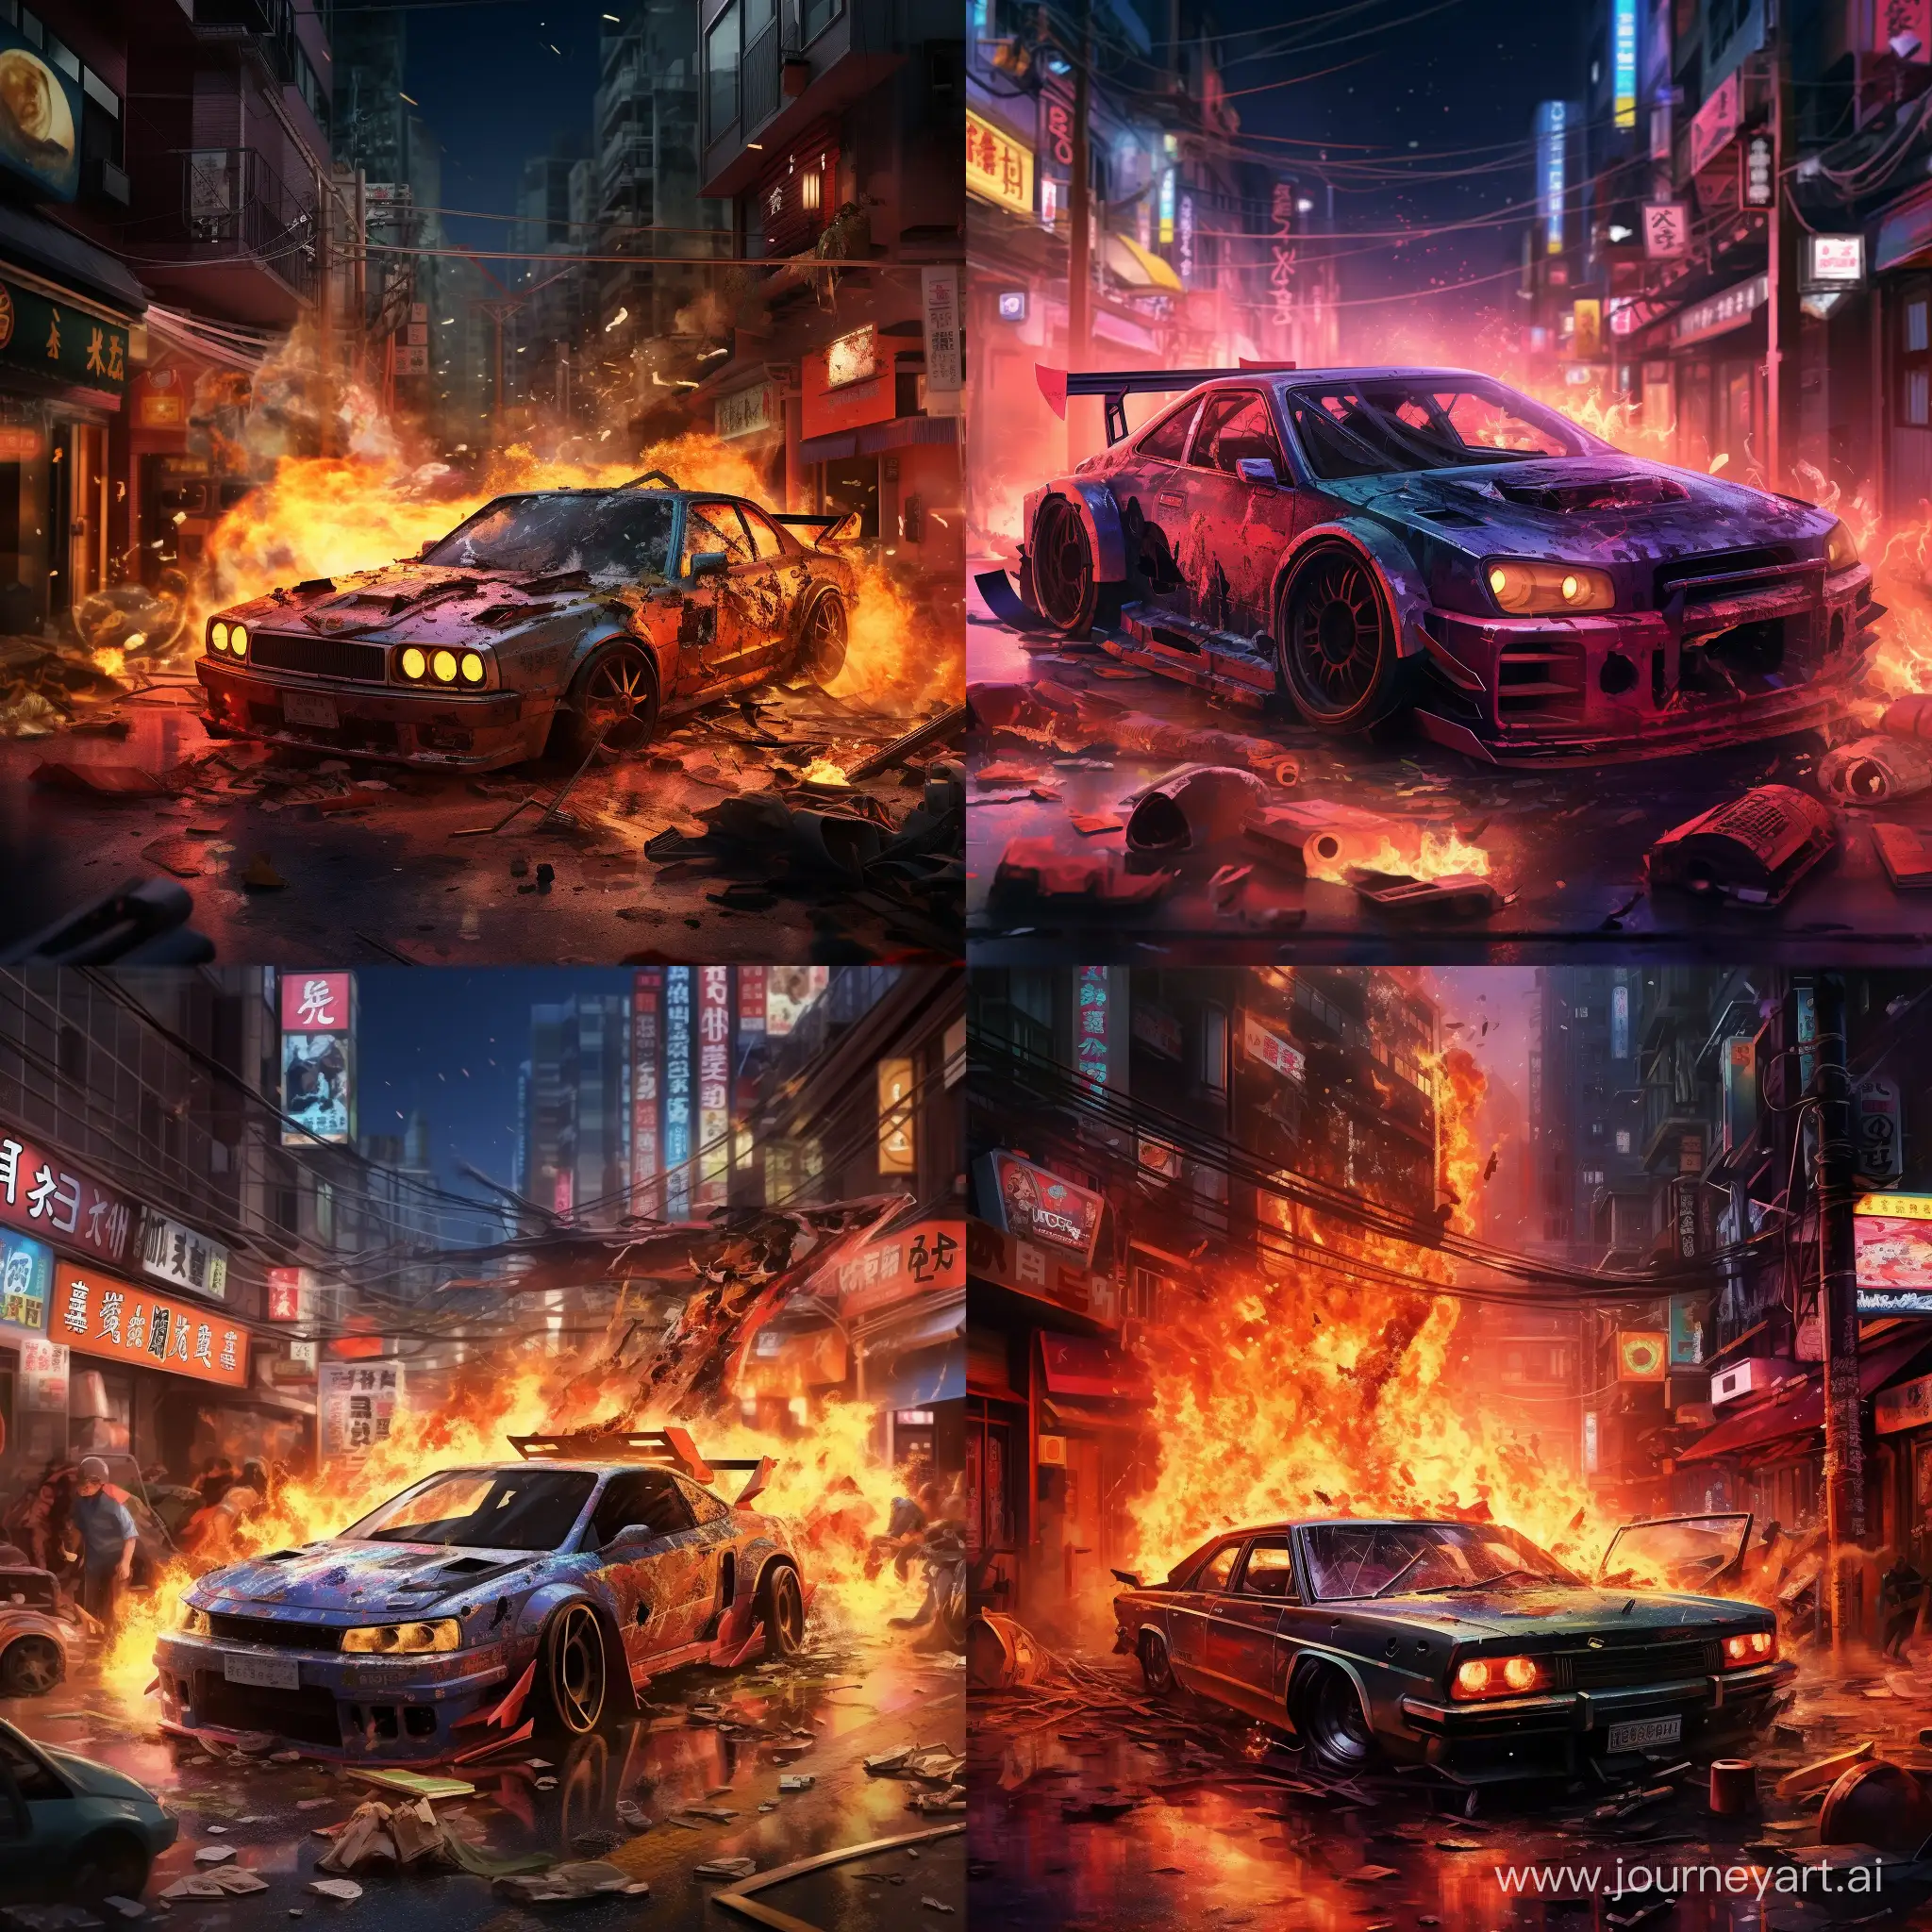 Intense-Car-Explosion-Amidst-Fiery-Chaos-in-Neonlit-Japanese-Night